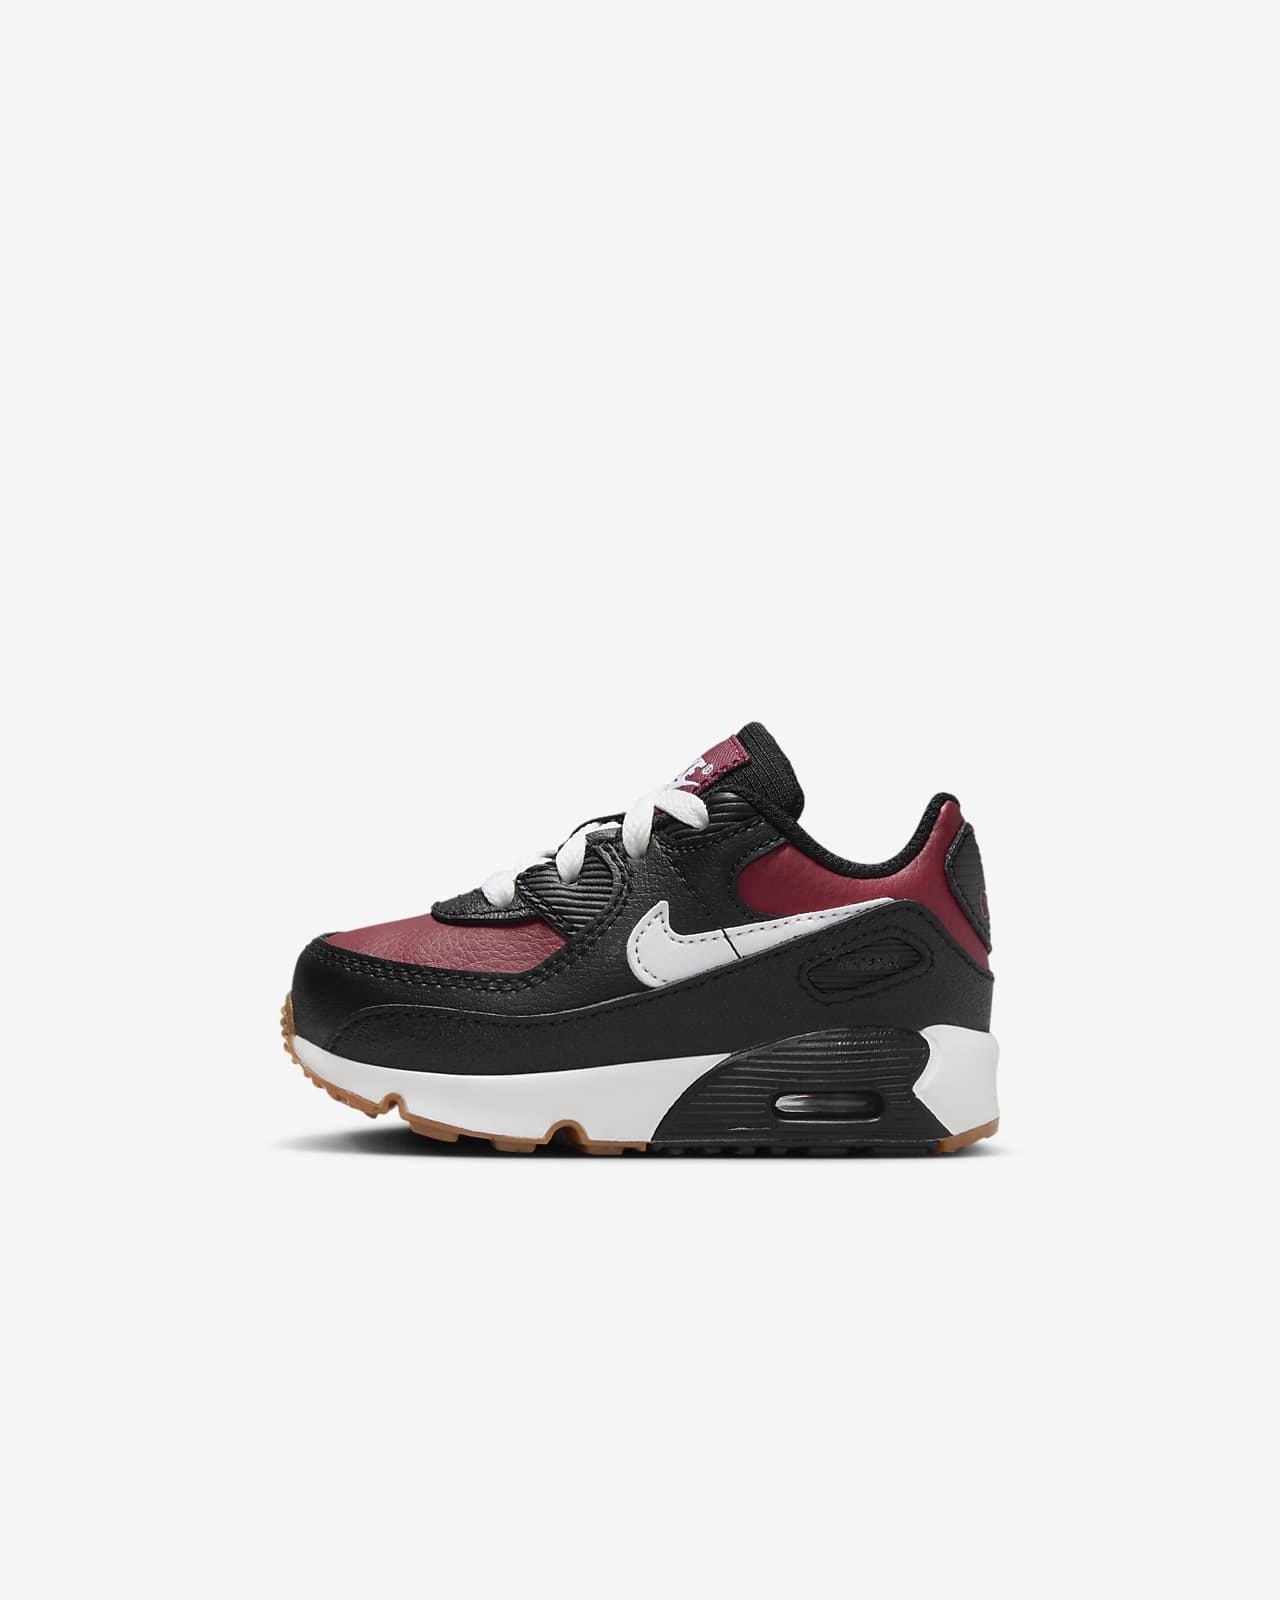 Nike Air Max 90 LTR Baby/Toddler Shoes. Nike SG